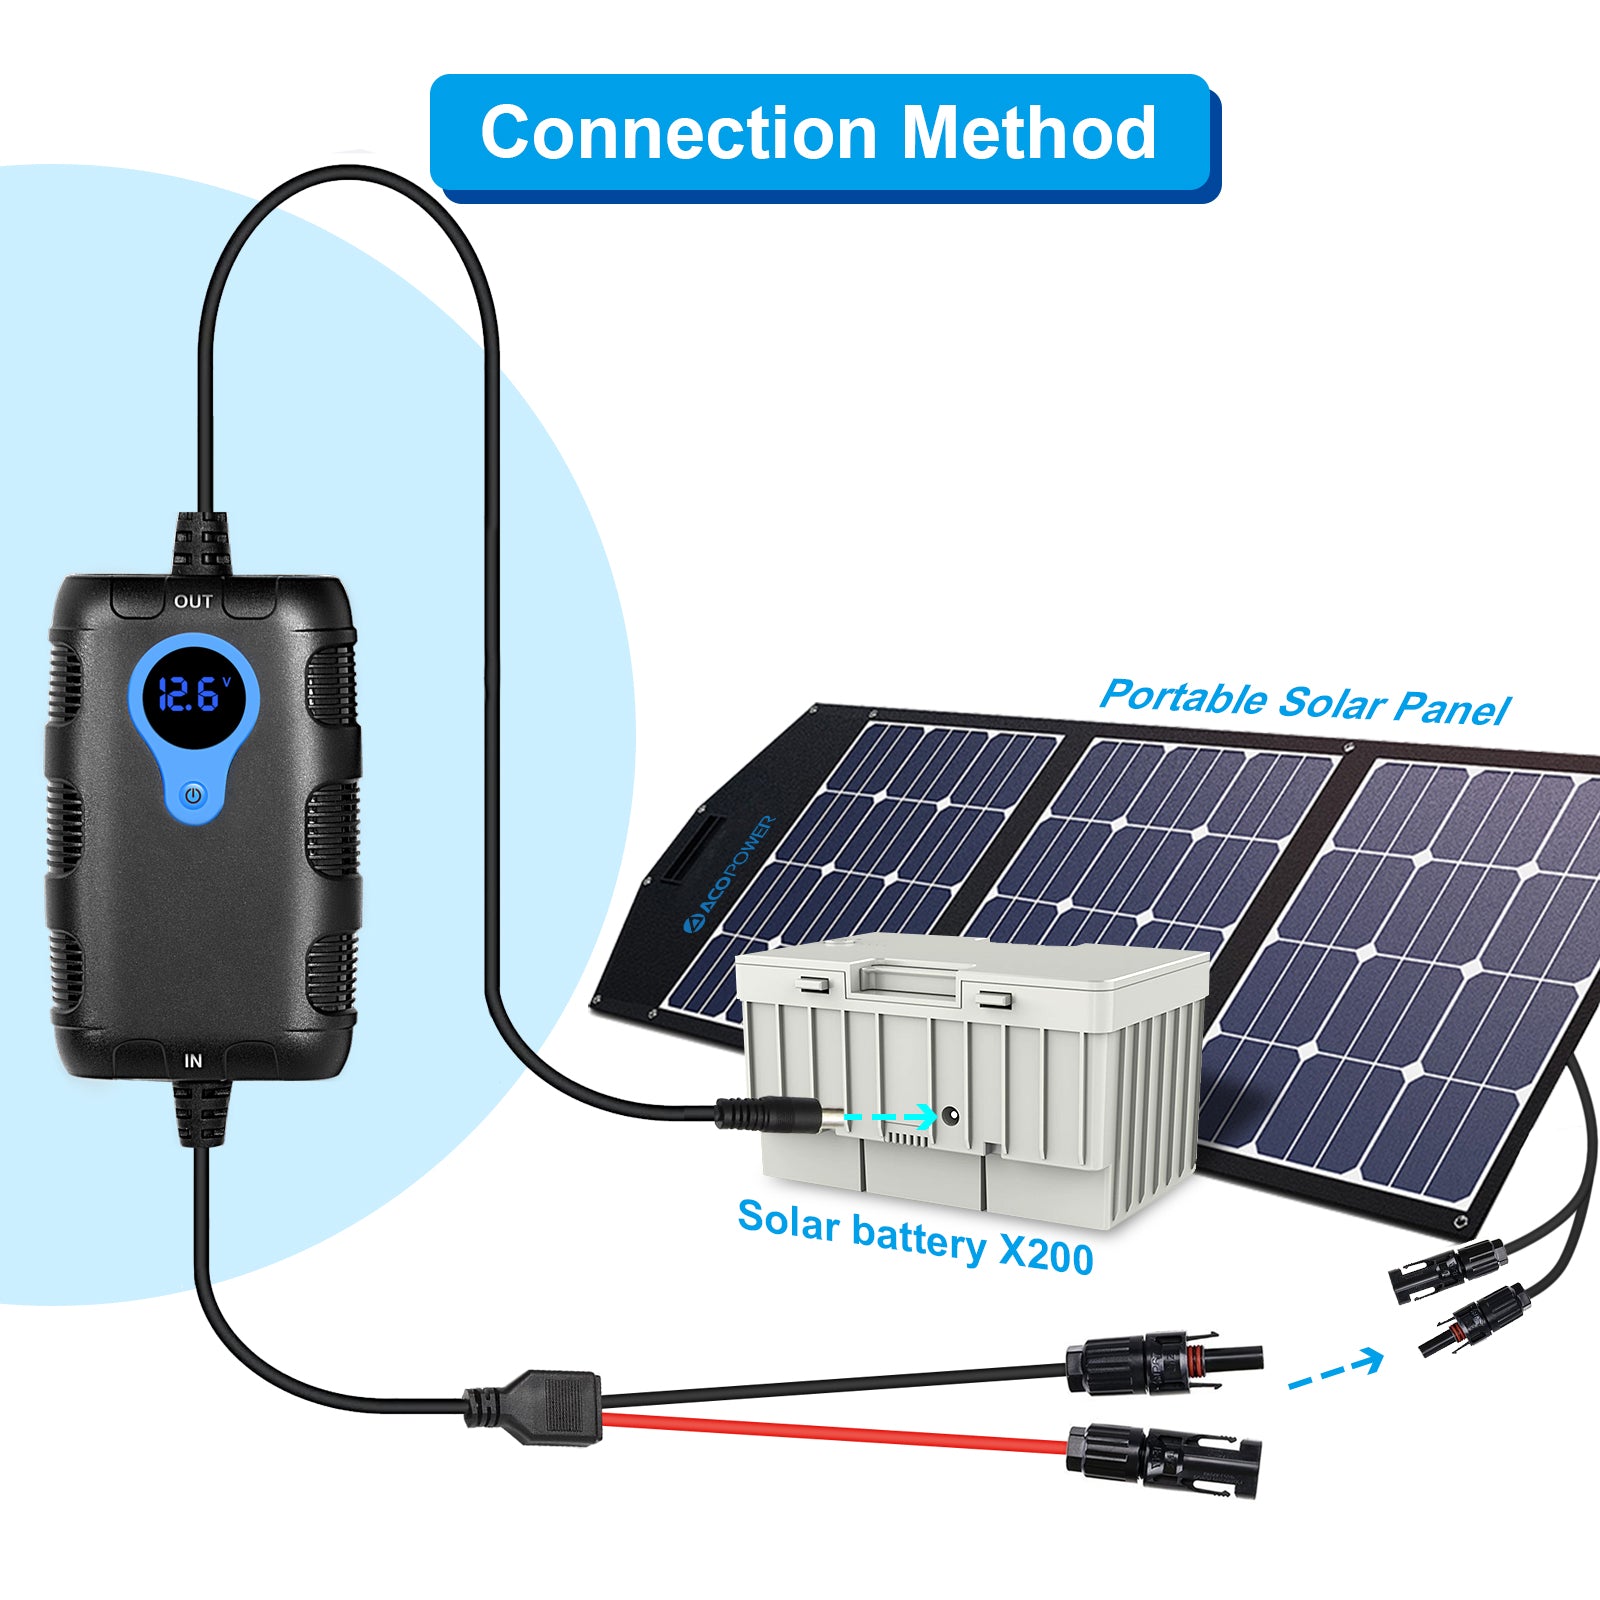 Charge Controller Best Matched for Charging the X200A with Solar Panel Separately